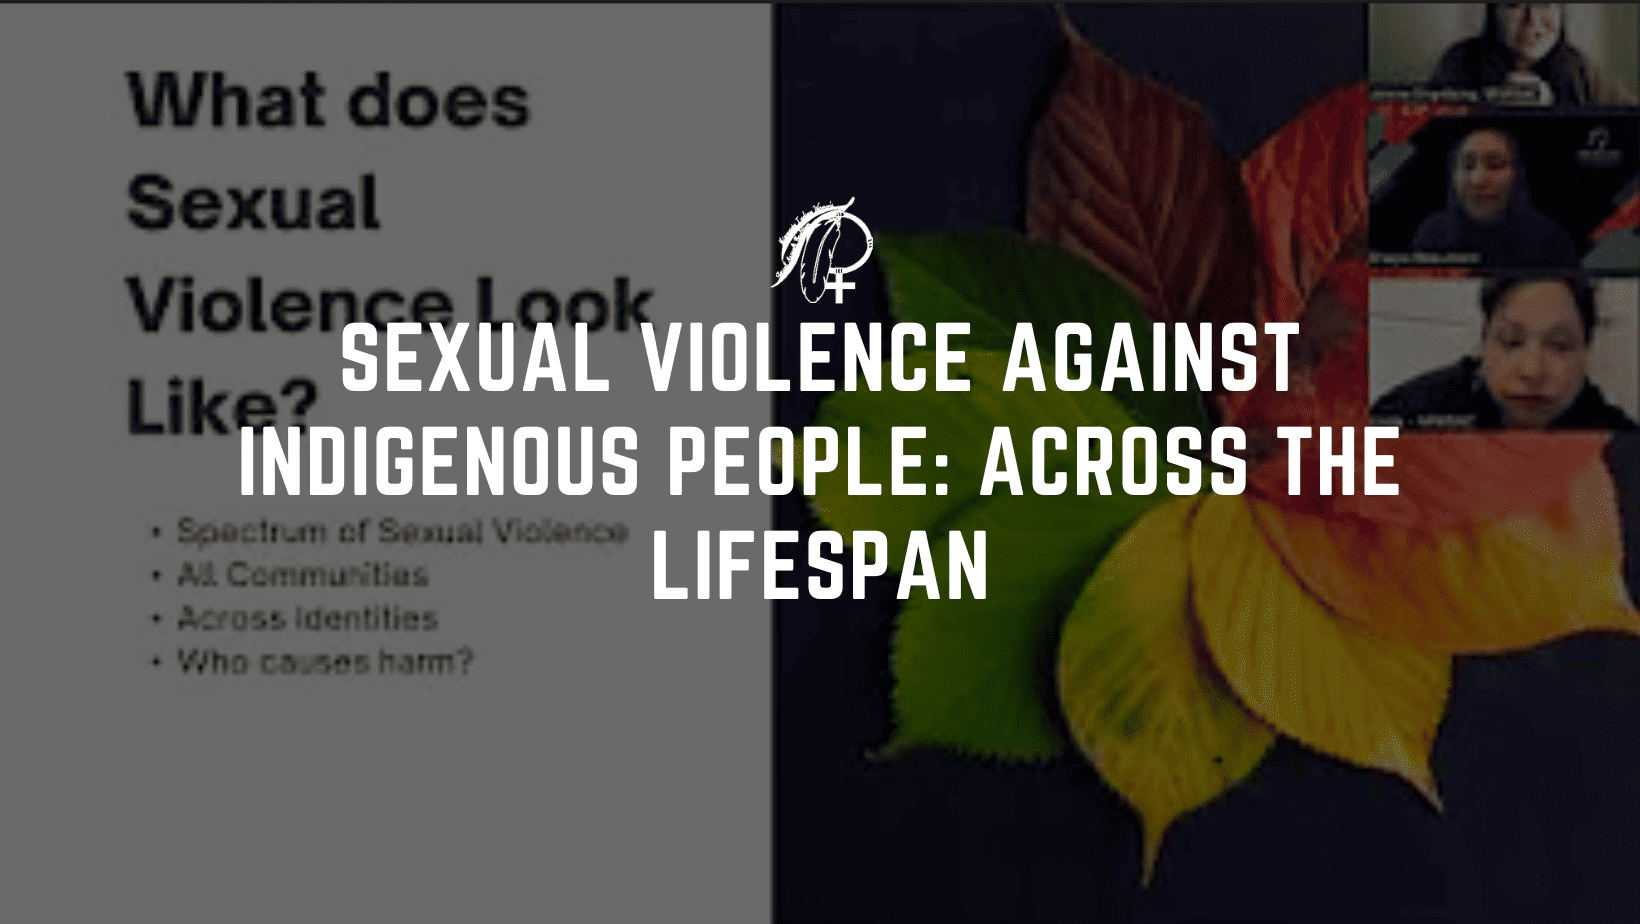 Sexual Violence Against Indigenous People Across the Lifespan